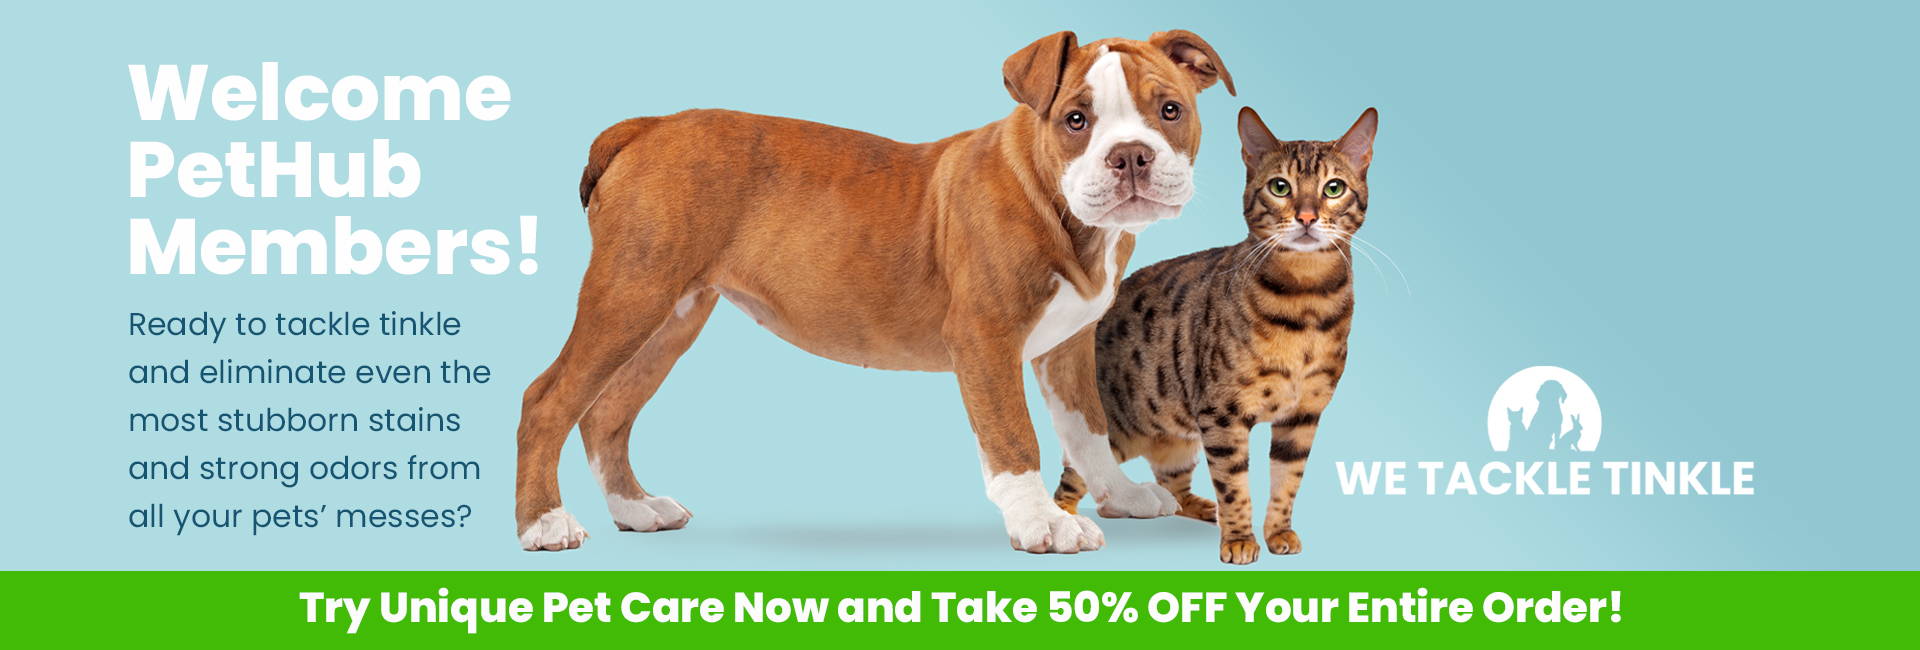 welcome pet hub members banner with dog and cat for Unique Pet Care stain and odor remover products